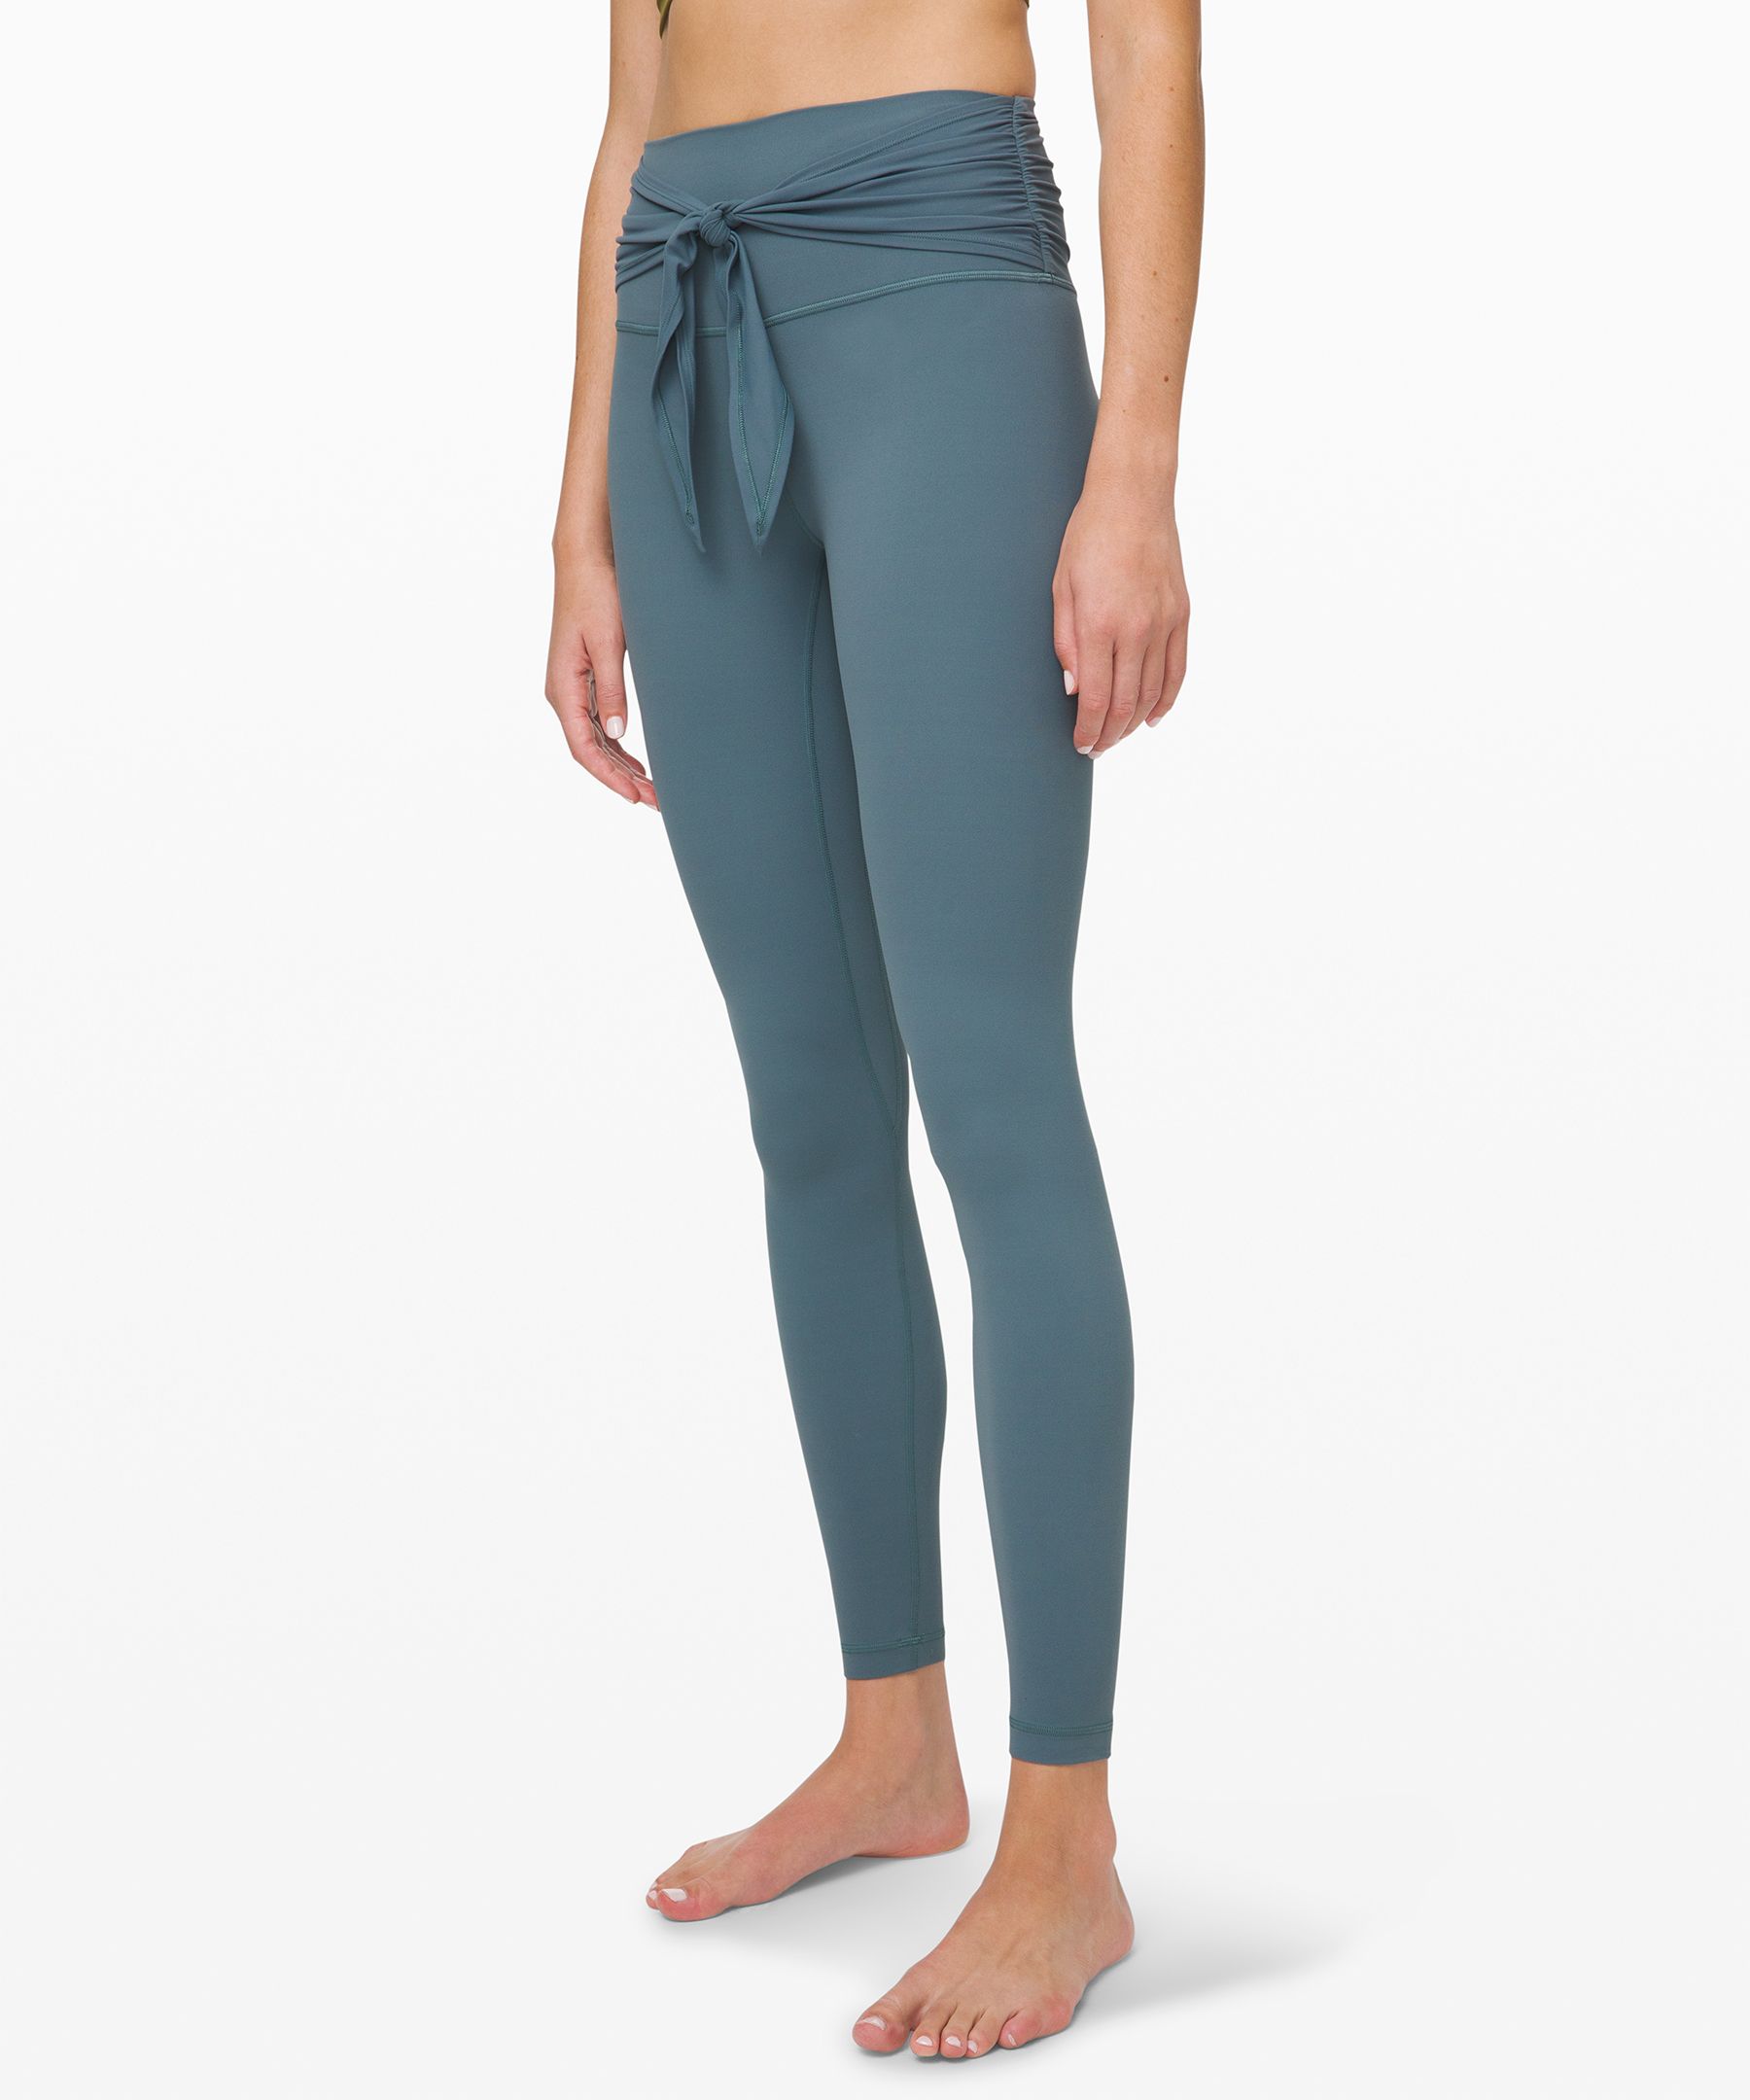 Are Zyia Leggings Squat Proof Research